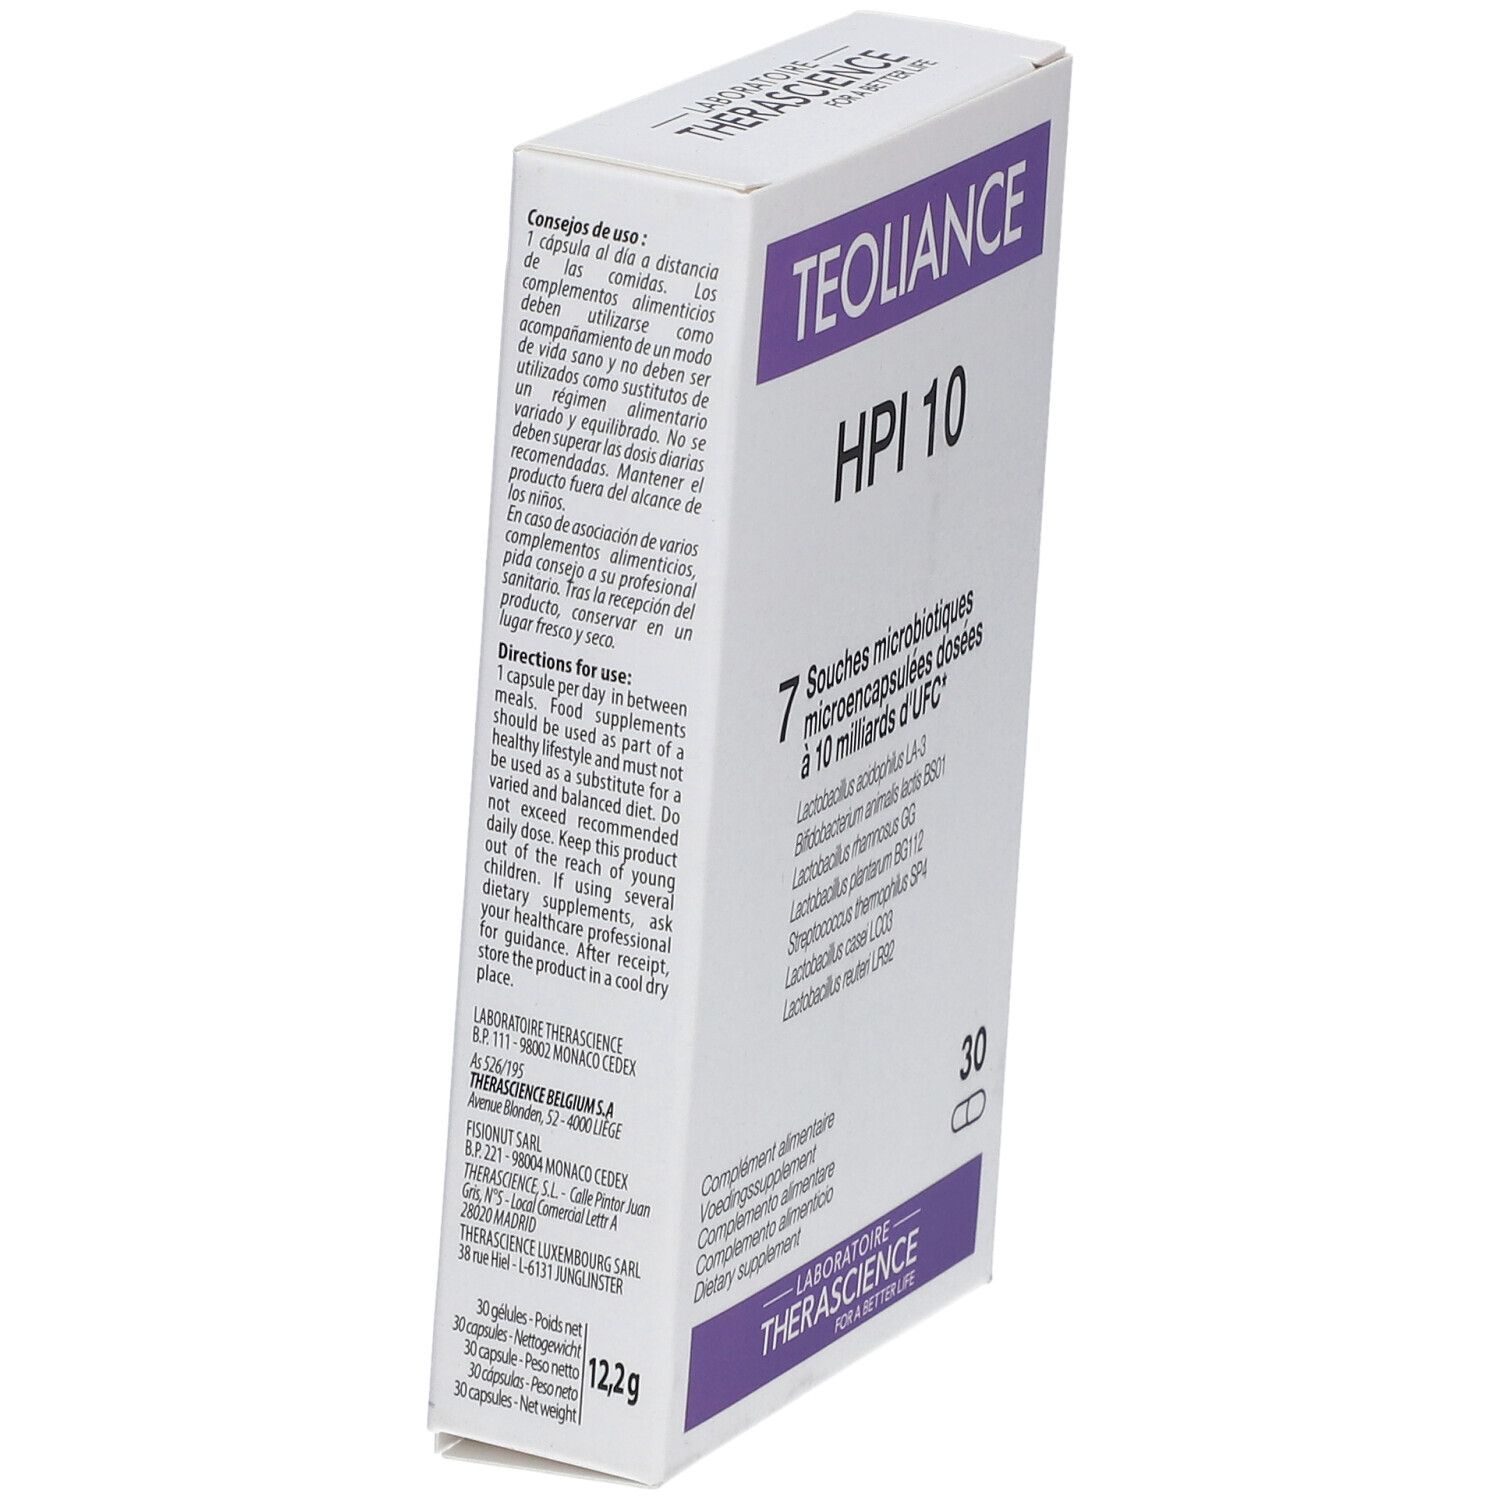 TEOLIANCE HPI 10 PHY247